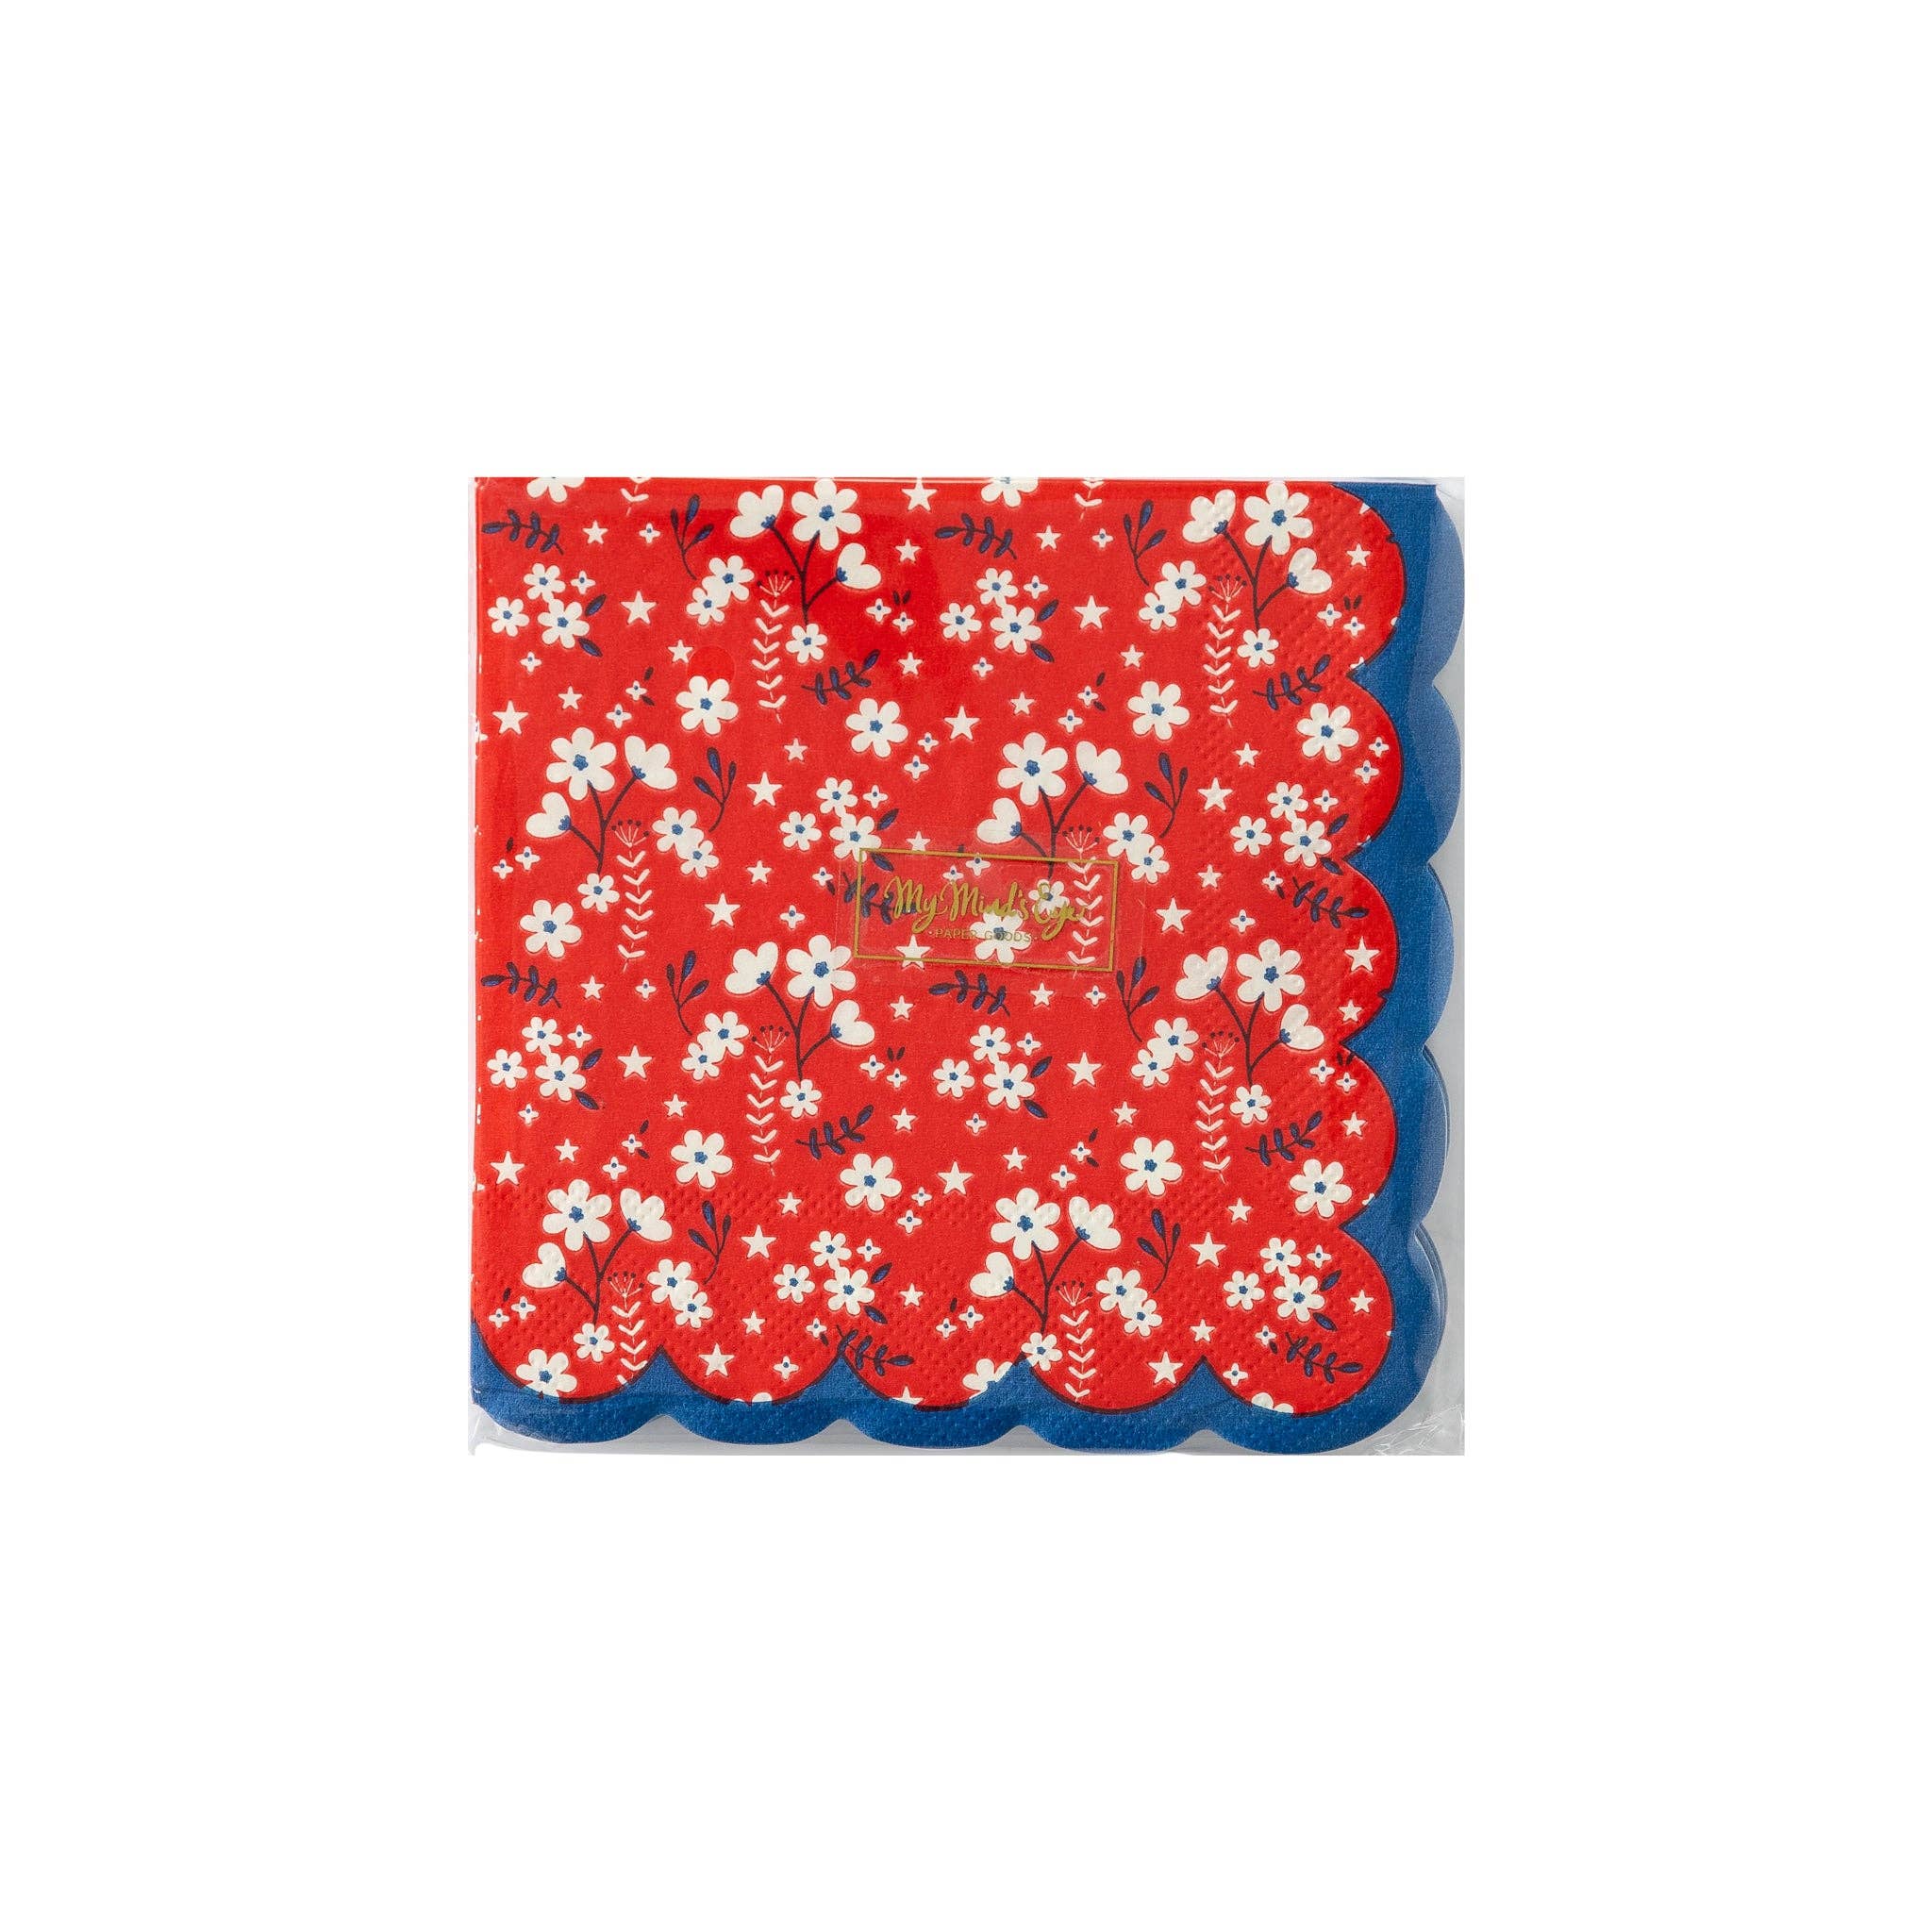 SSP934 - Americana Floral Cocktail Napkin - Oh My Darling Party Co-Faire #Fringe_Backdrop#